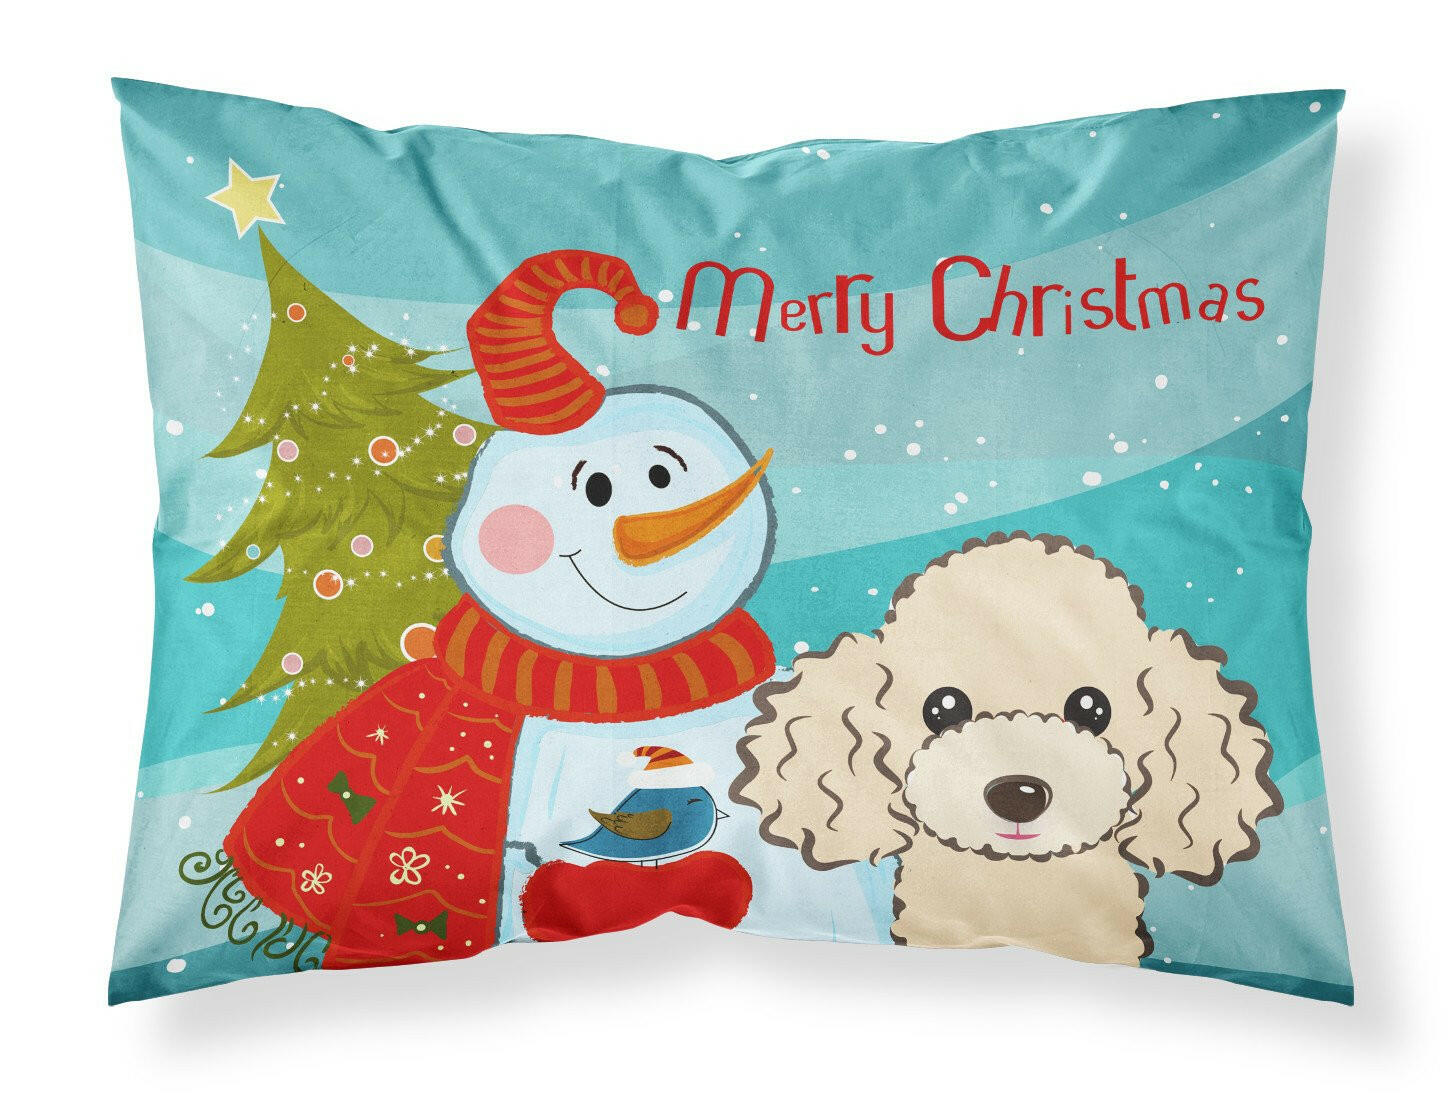 Snowman with Buff Poodle Fabric Standard Pillowcase BB1878PILLOWCASE by Caroline's Treasures